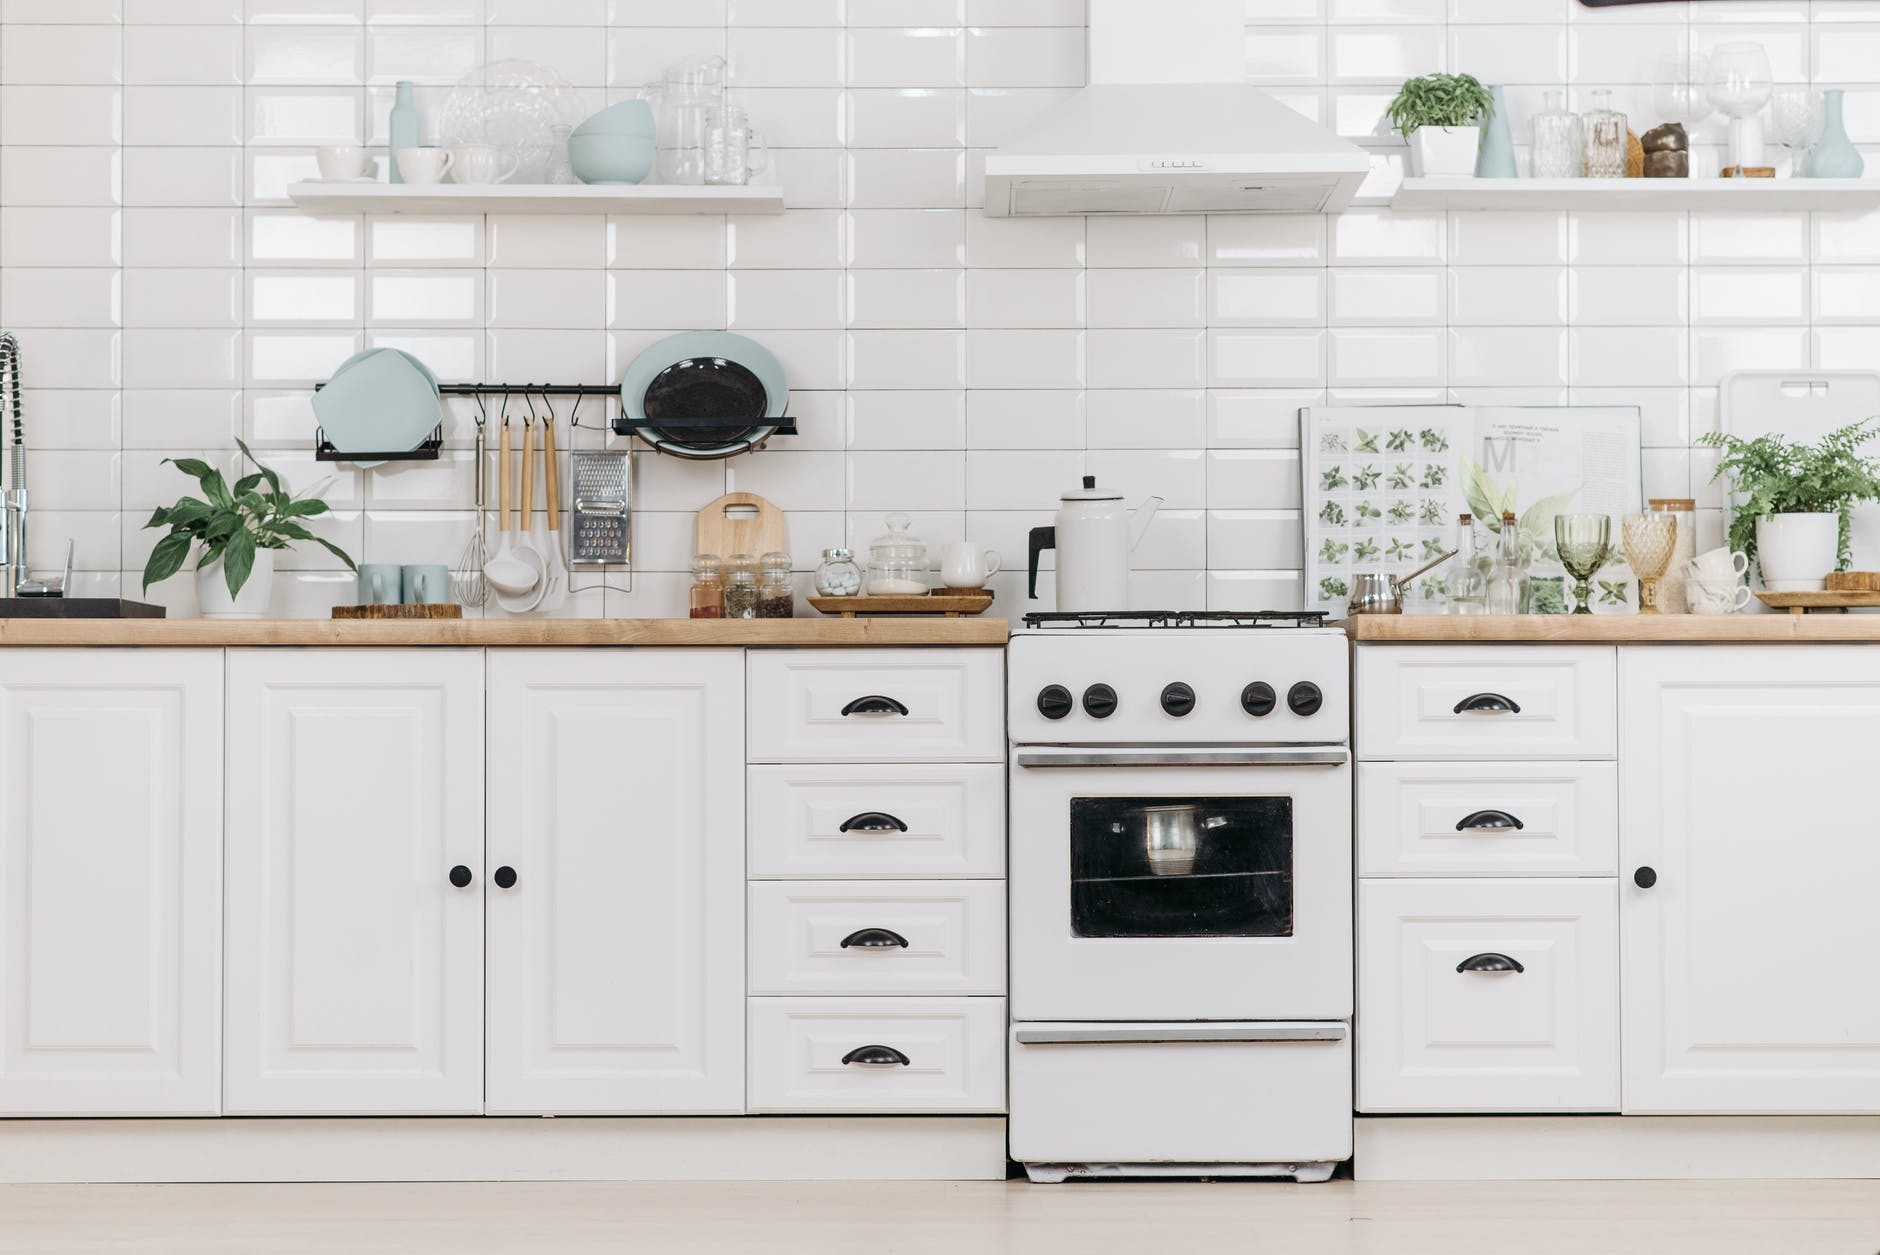 6 Ways To Save Money When Renovating a Kitchen